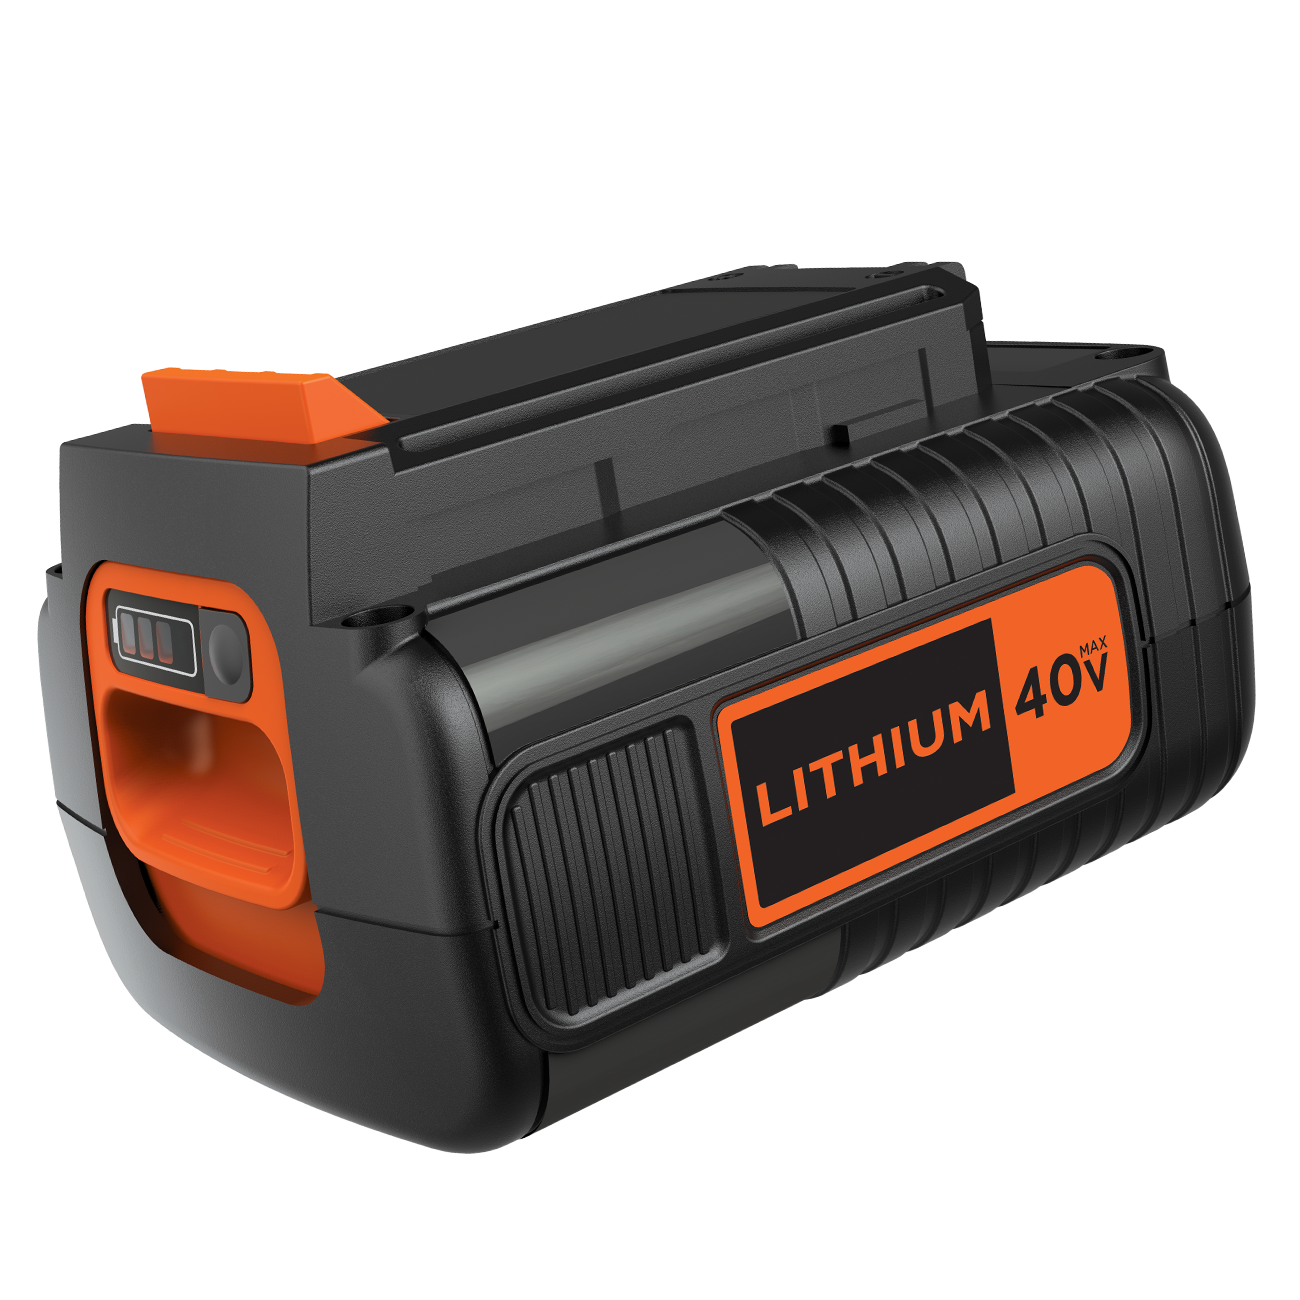 Looking for advice on black and decker 36v battery mower not